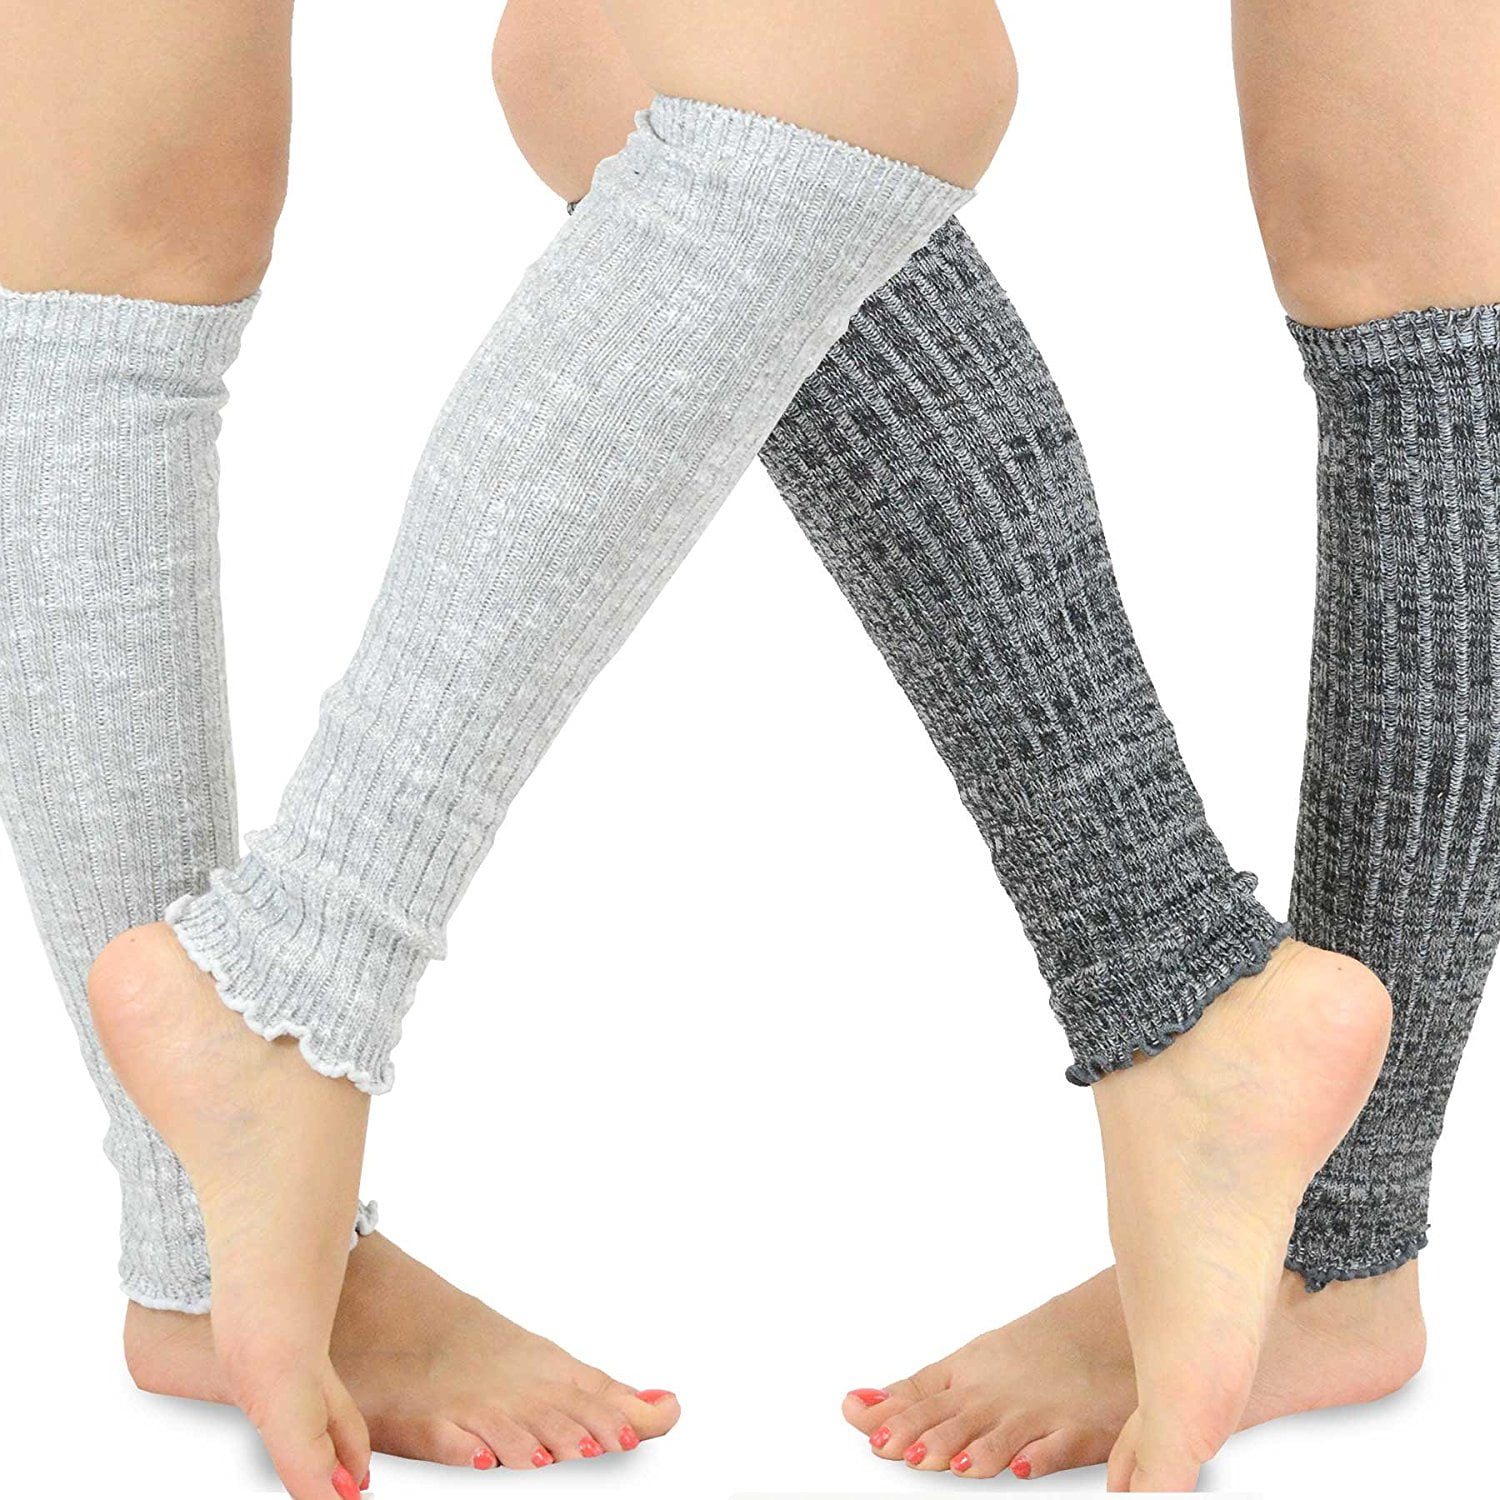 Super Soft 4 Color Chenille Dance/Exercise Knit Leg Warmers Boot Cuff Socks